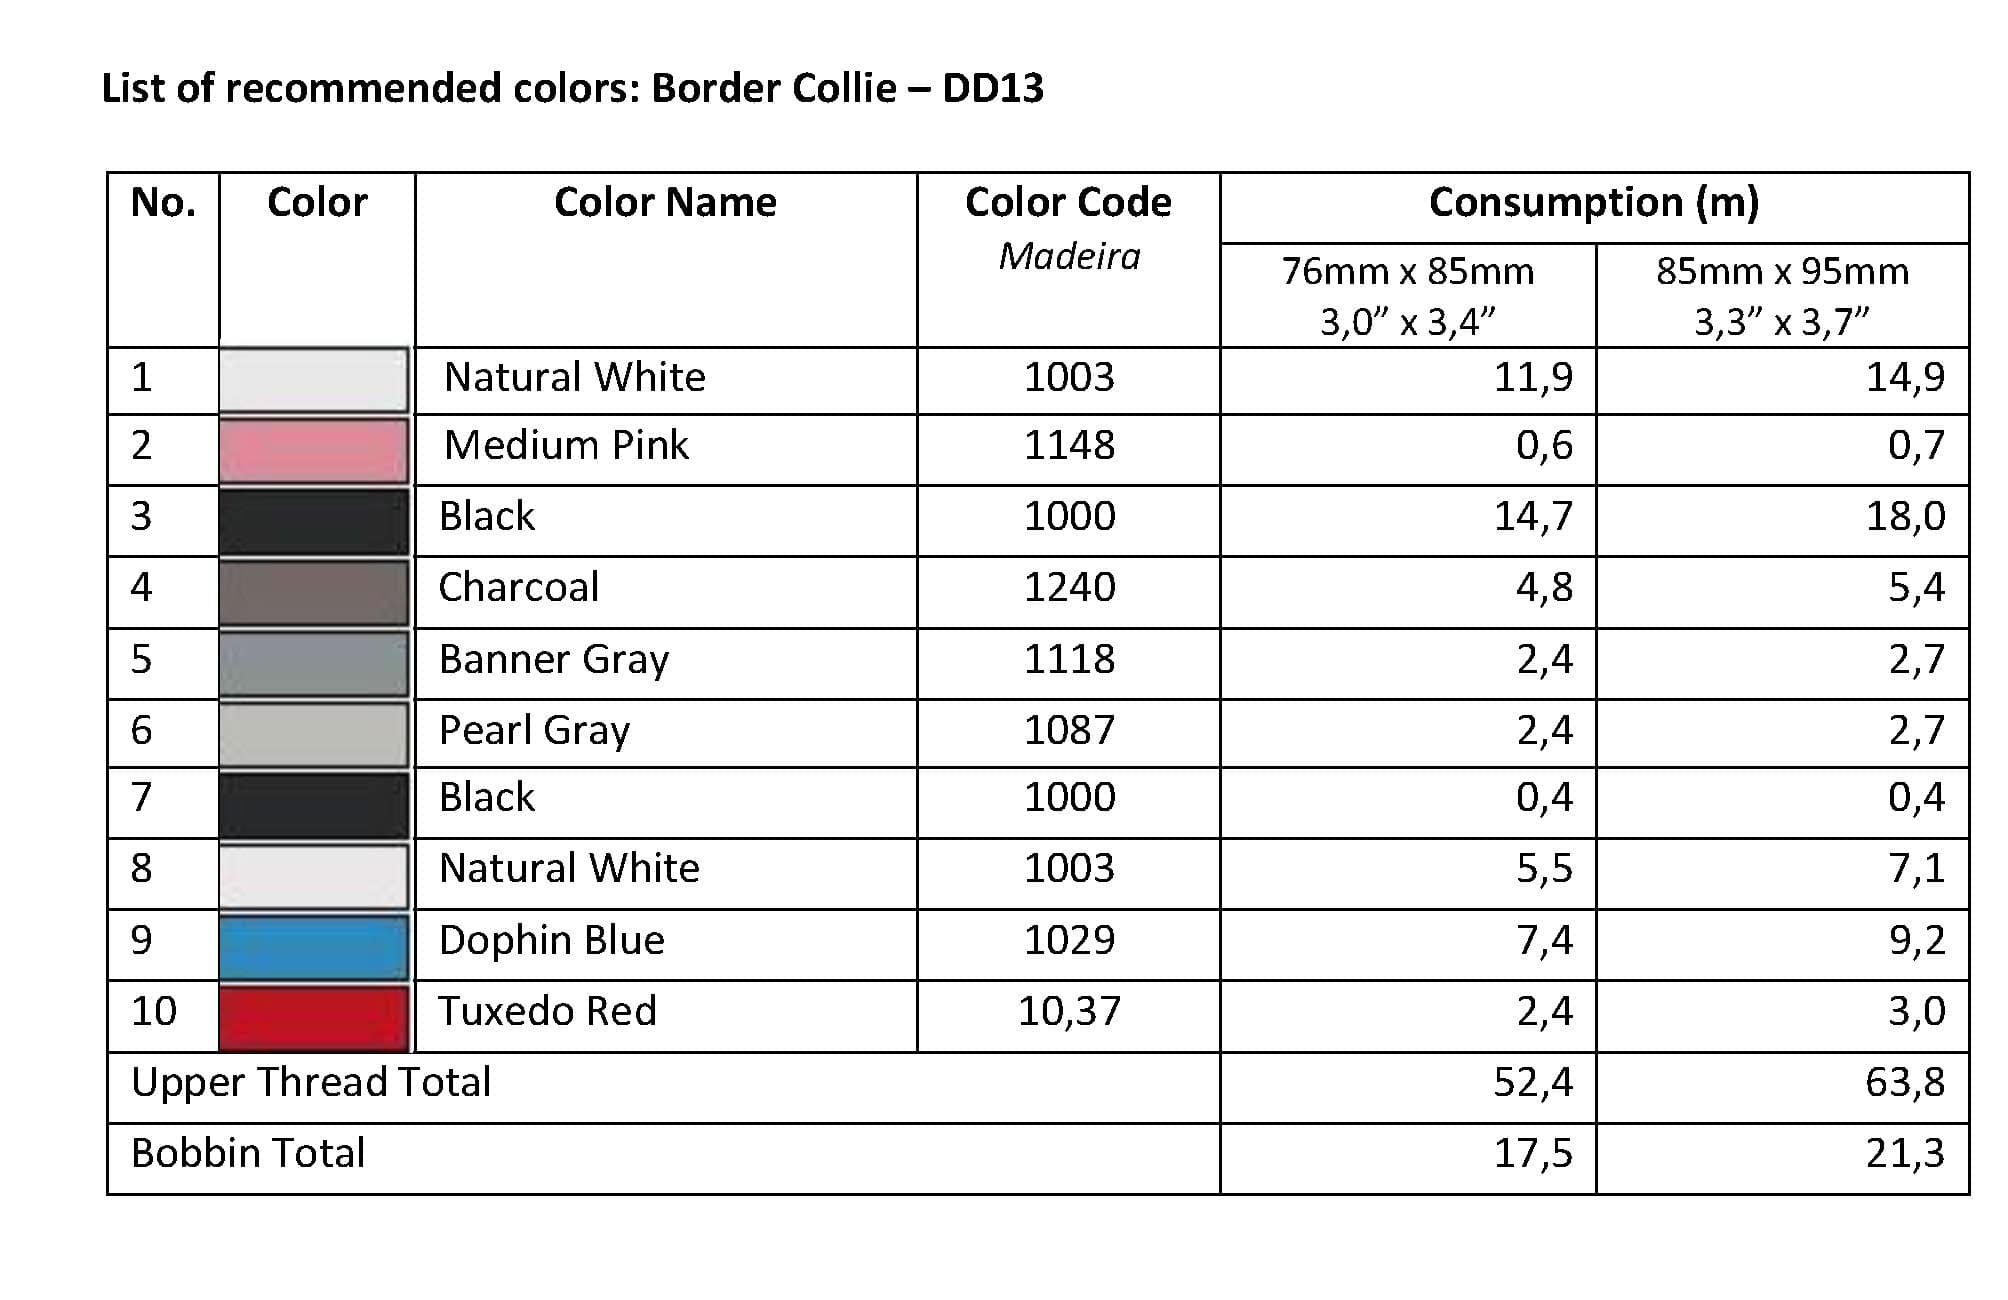 List of Recommended Colors - Border Collie DD13